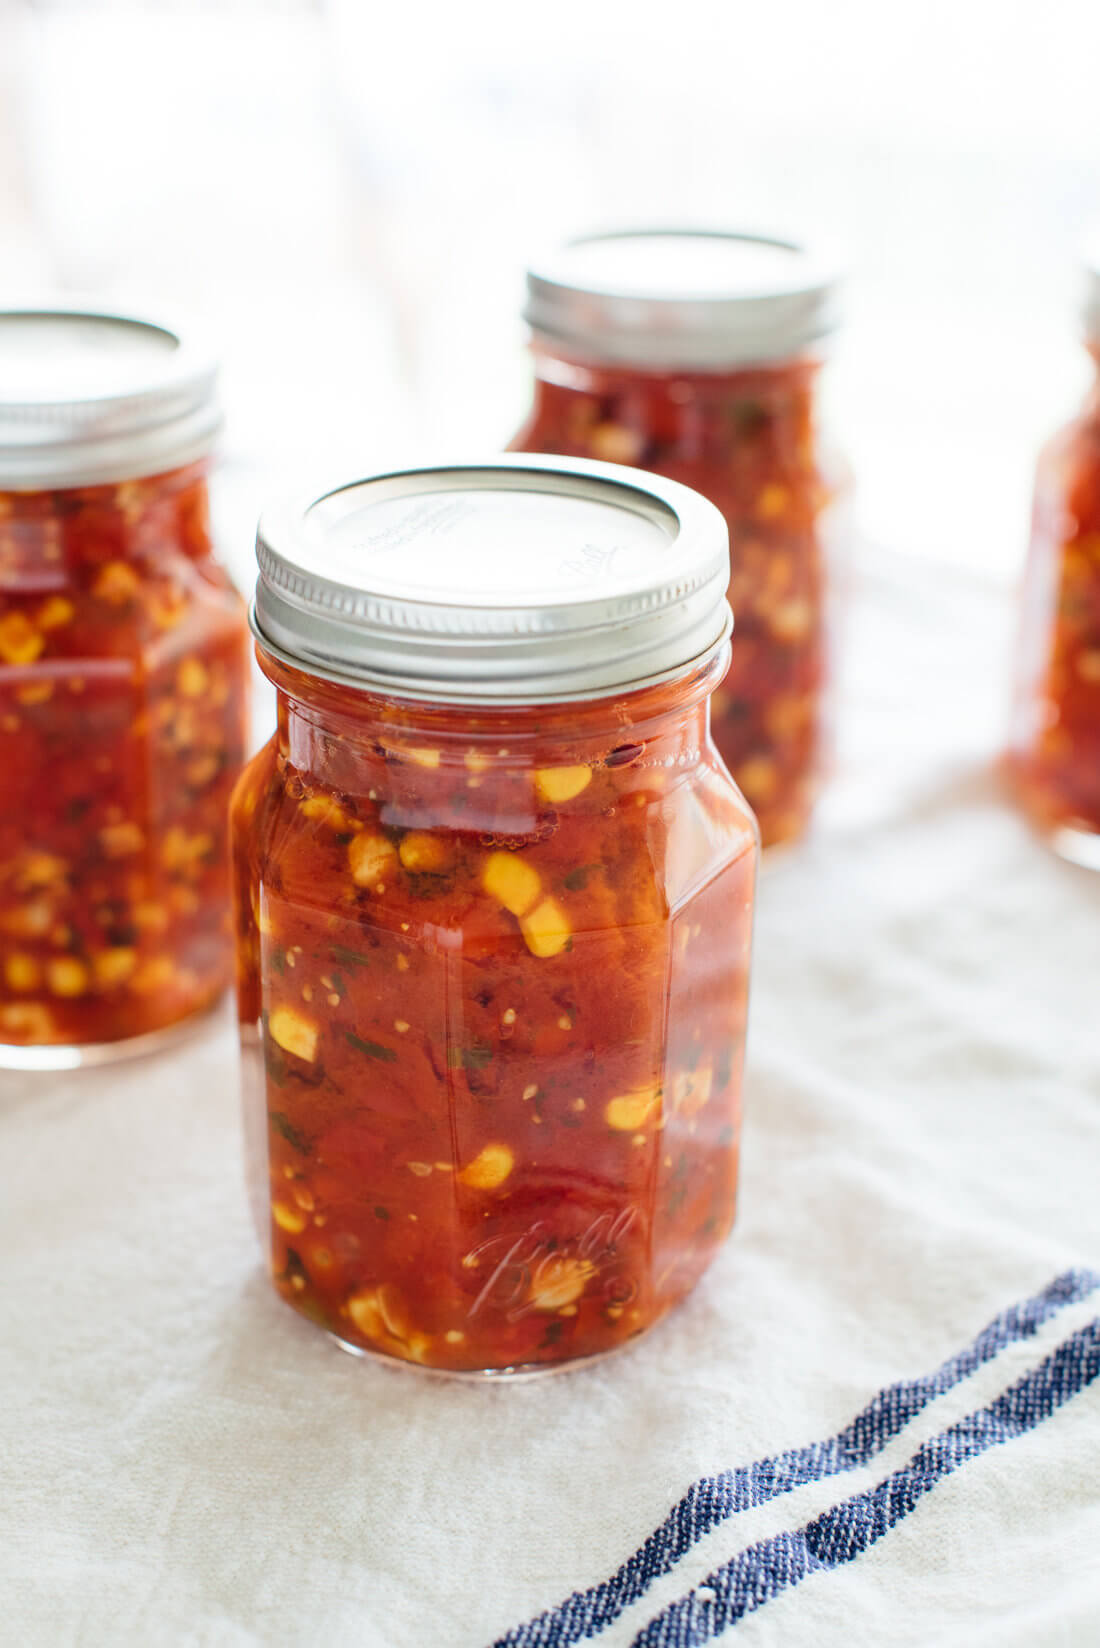 Preserve this cherry tomato and corn salsa now and enjoy it through the winter! Get the recipe at cookieandkate.com